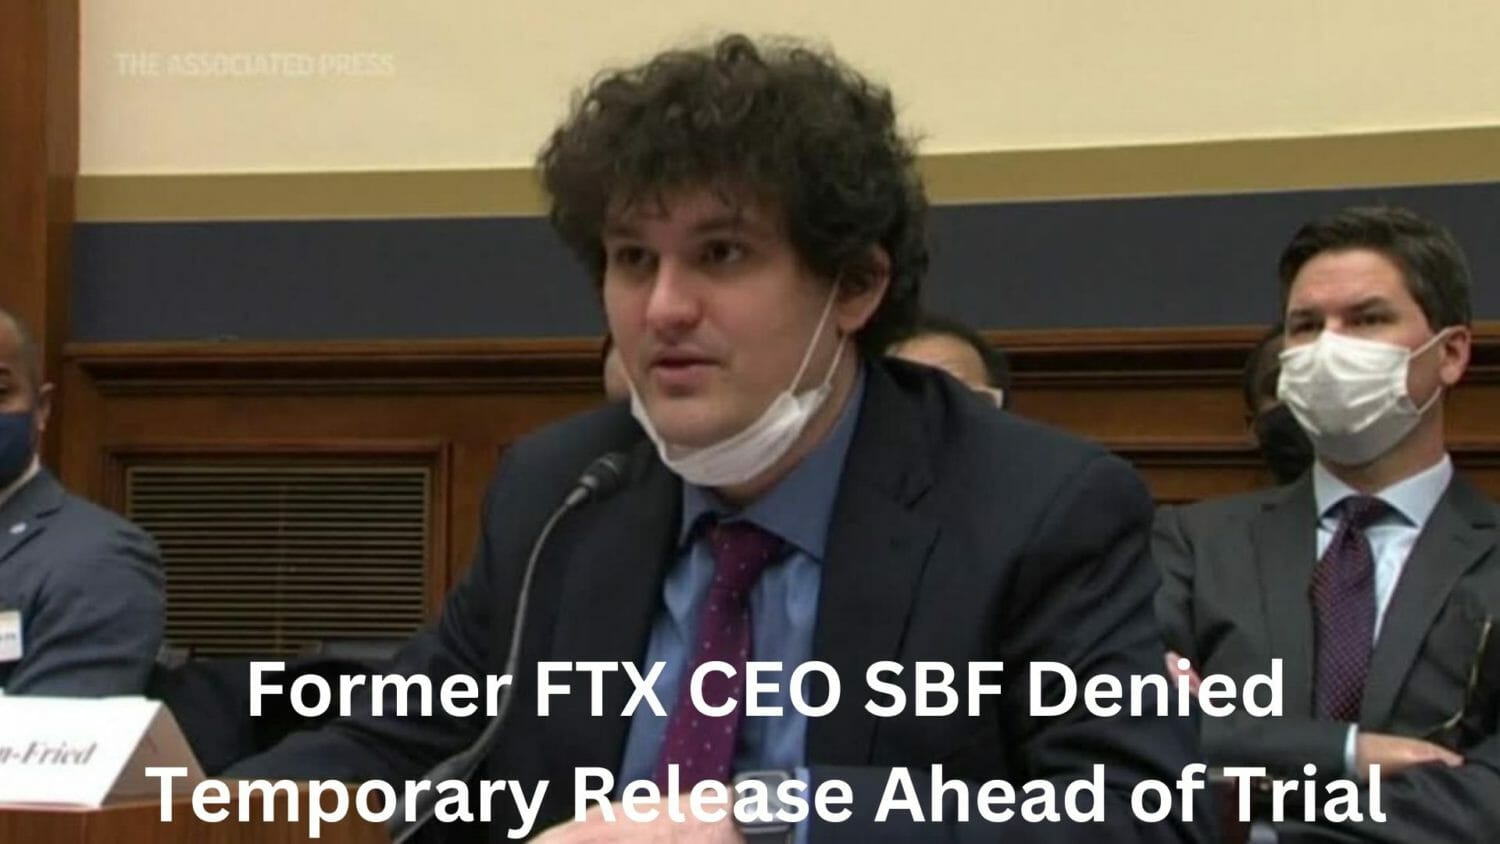 Former Ftx Ceo Sbf Denied Temporary Release Ahead Of Trial